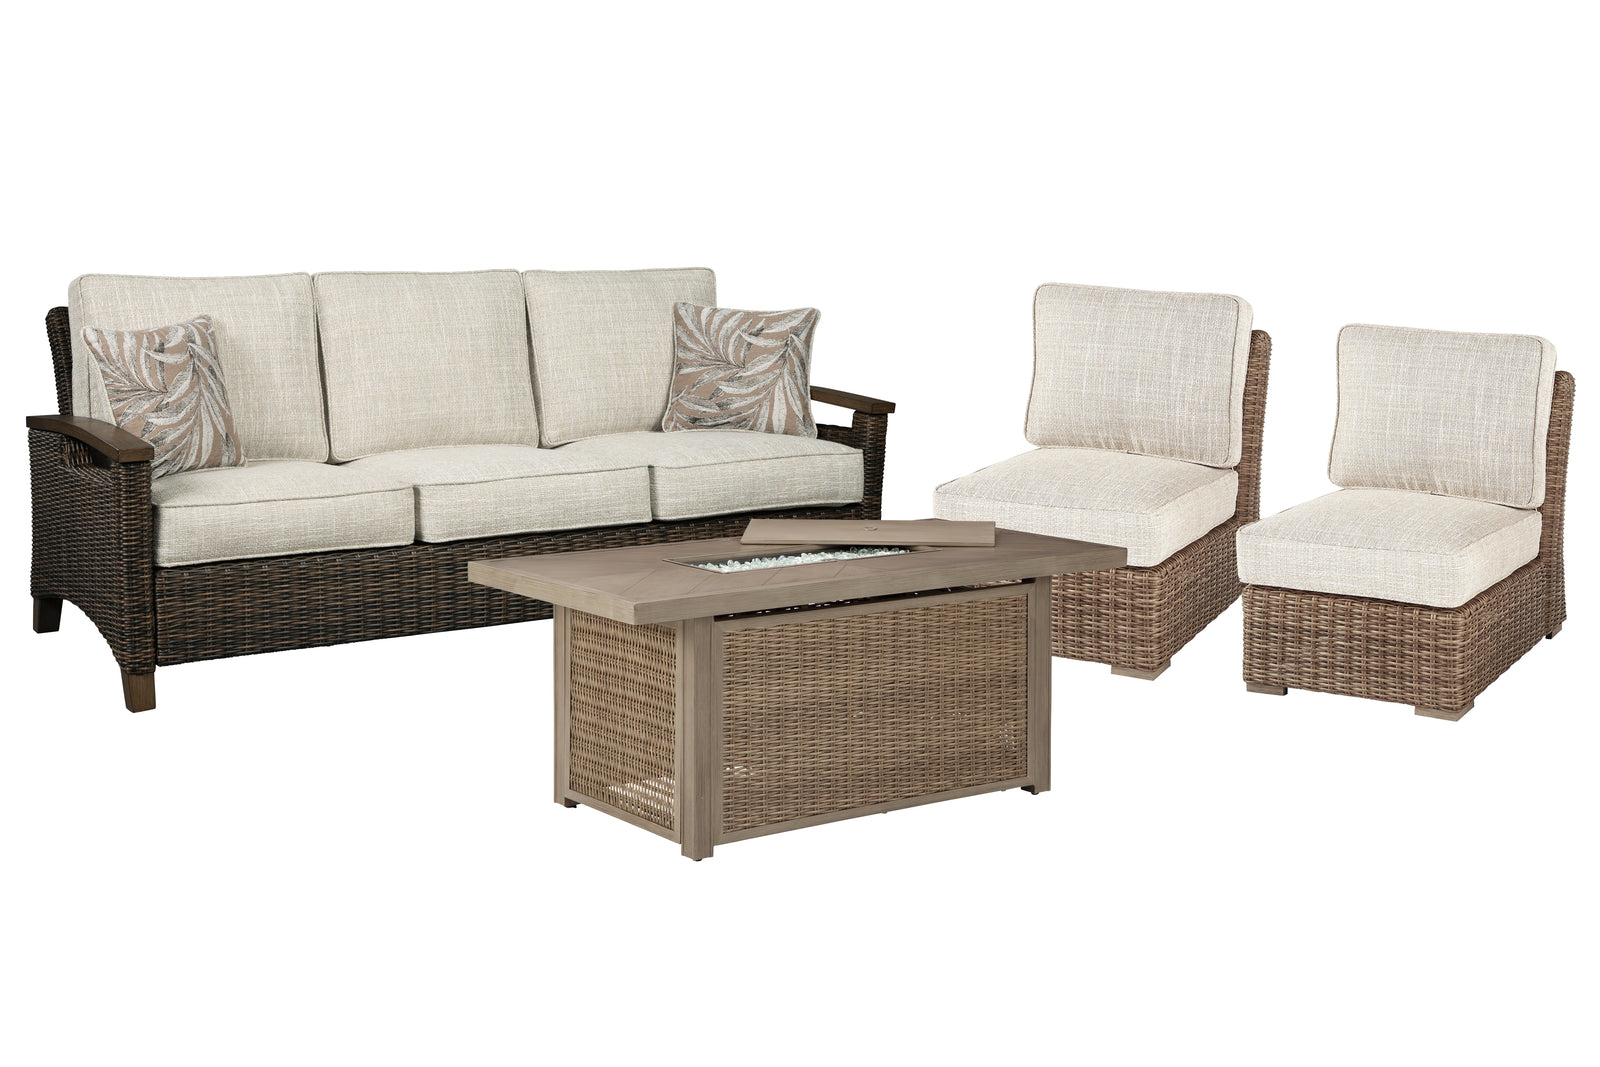 Beachcroft Beige Outdoor Sofa And 2 Lounge Chairs With Fire Pit Table